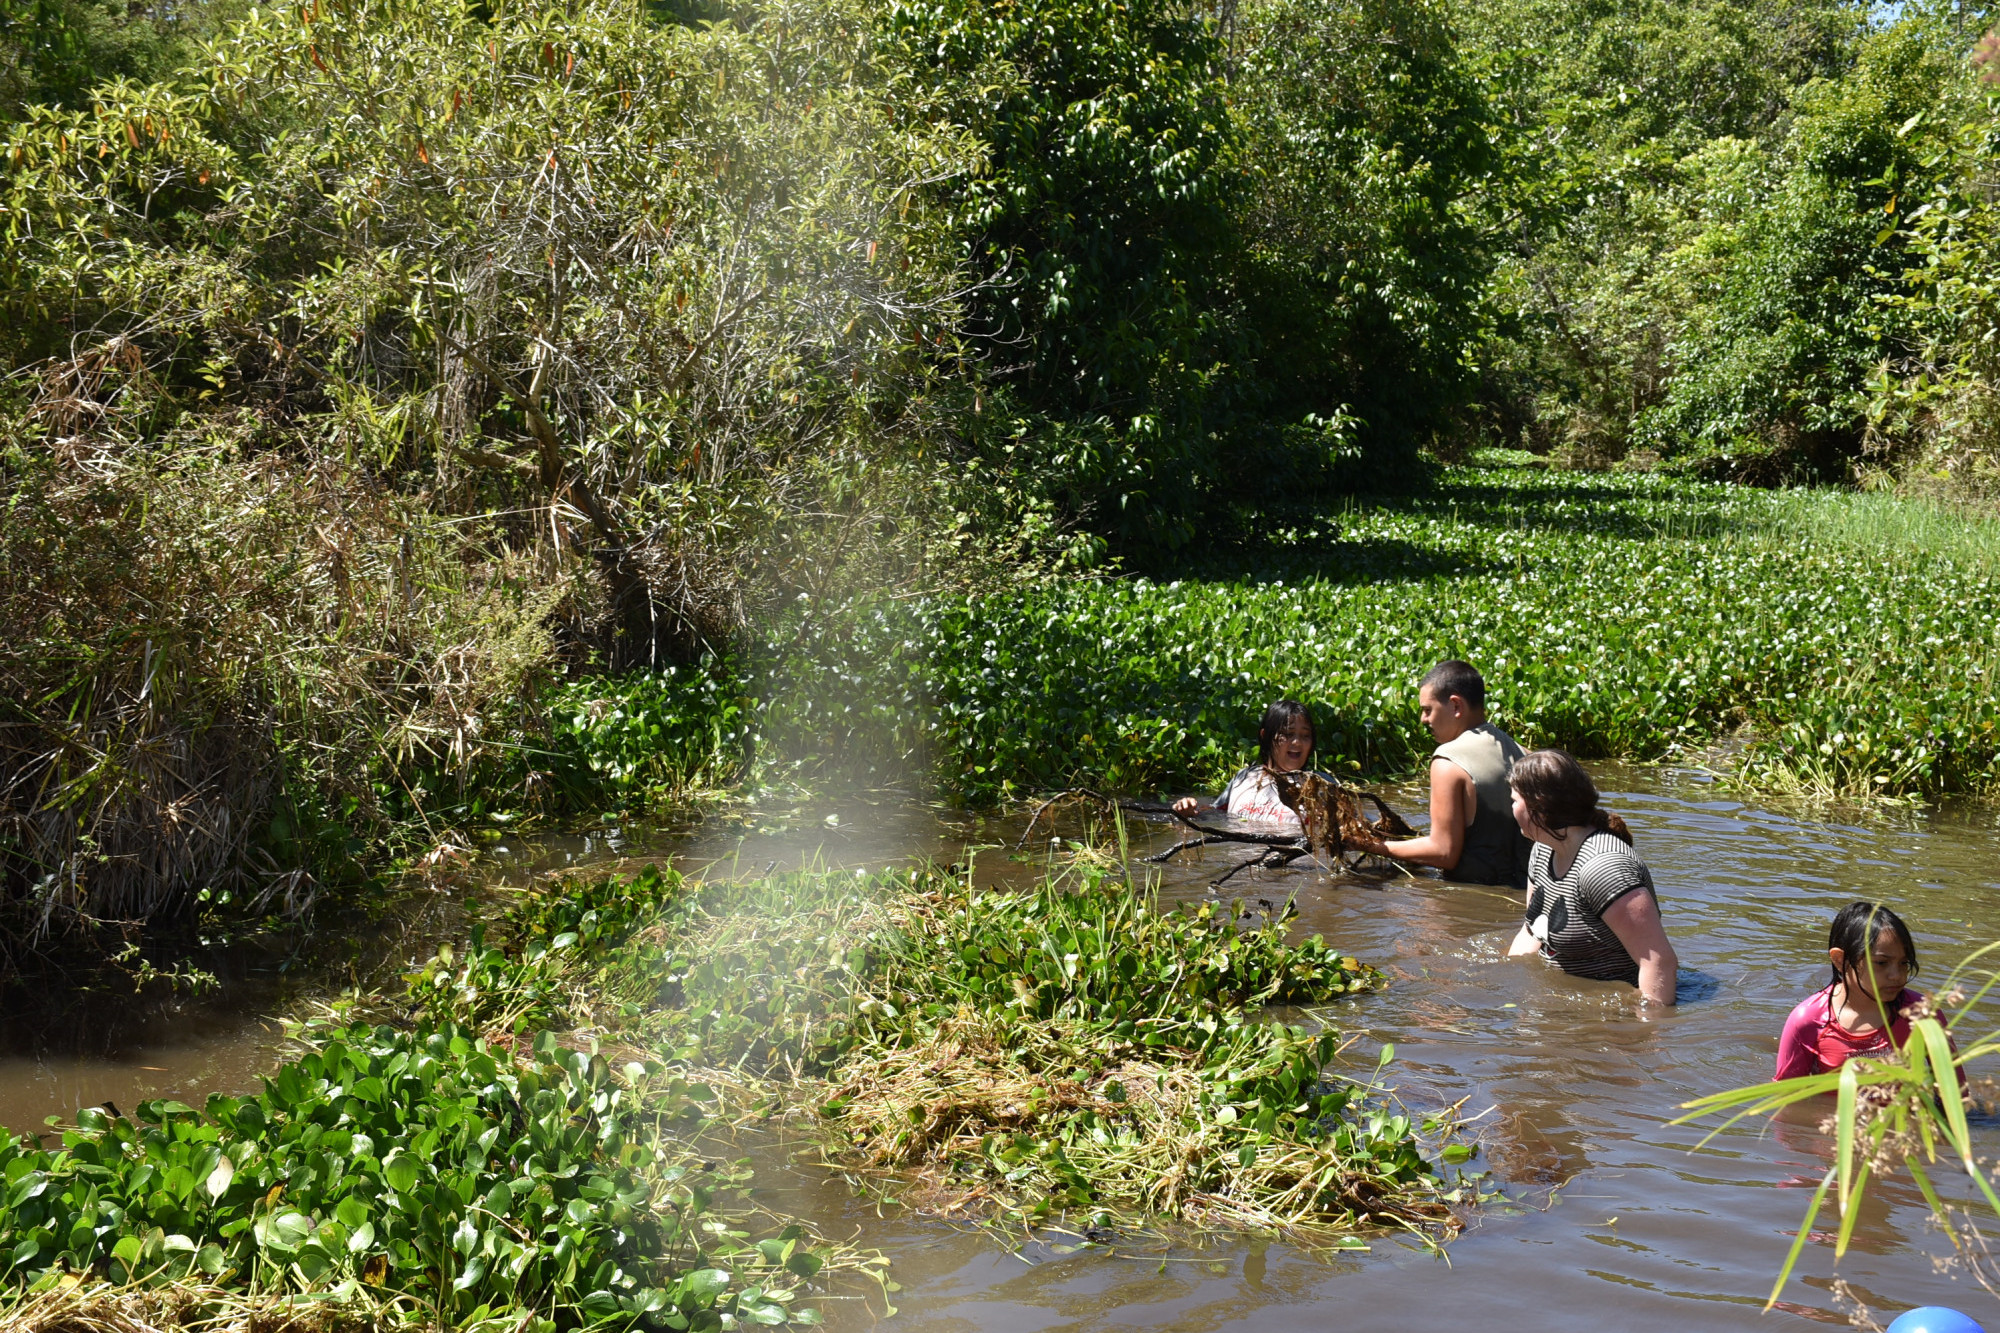 Working together to clear out the Amazon Frogbit from the Atherton Creek